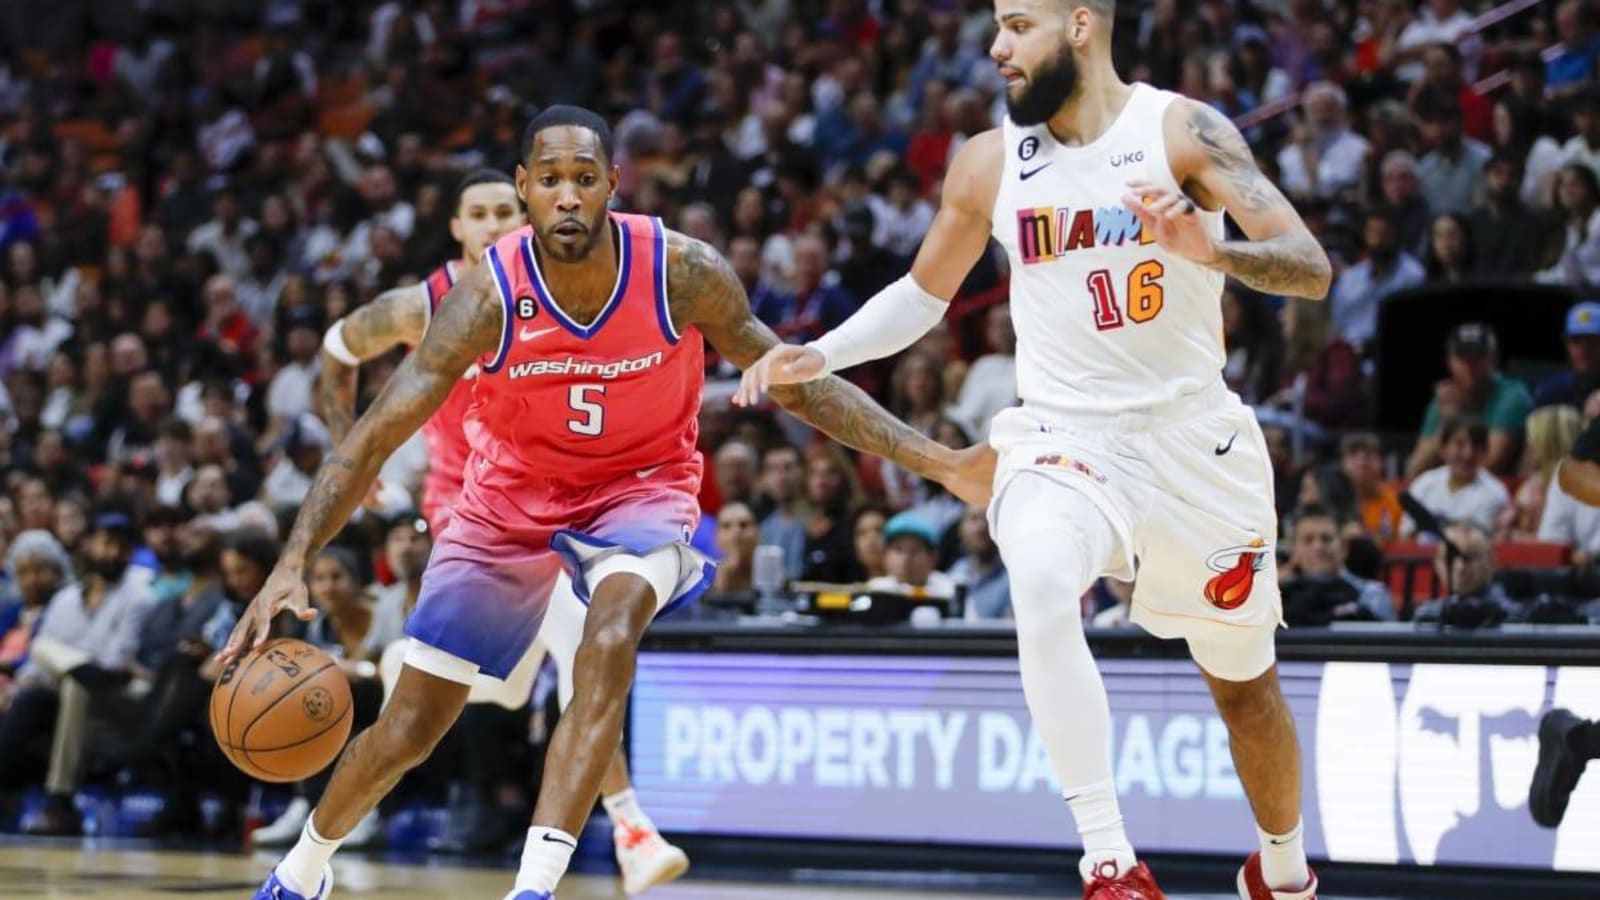 Will Barton Discusses Why He Joined the Raptors & How He Hopes to Help Toronto